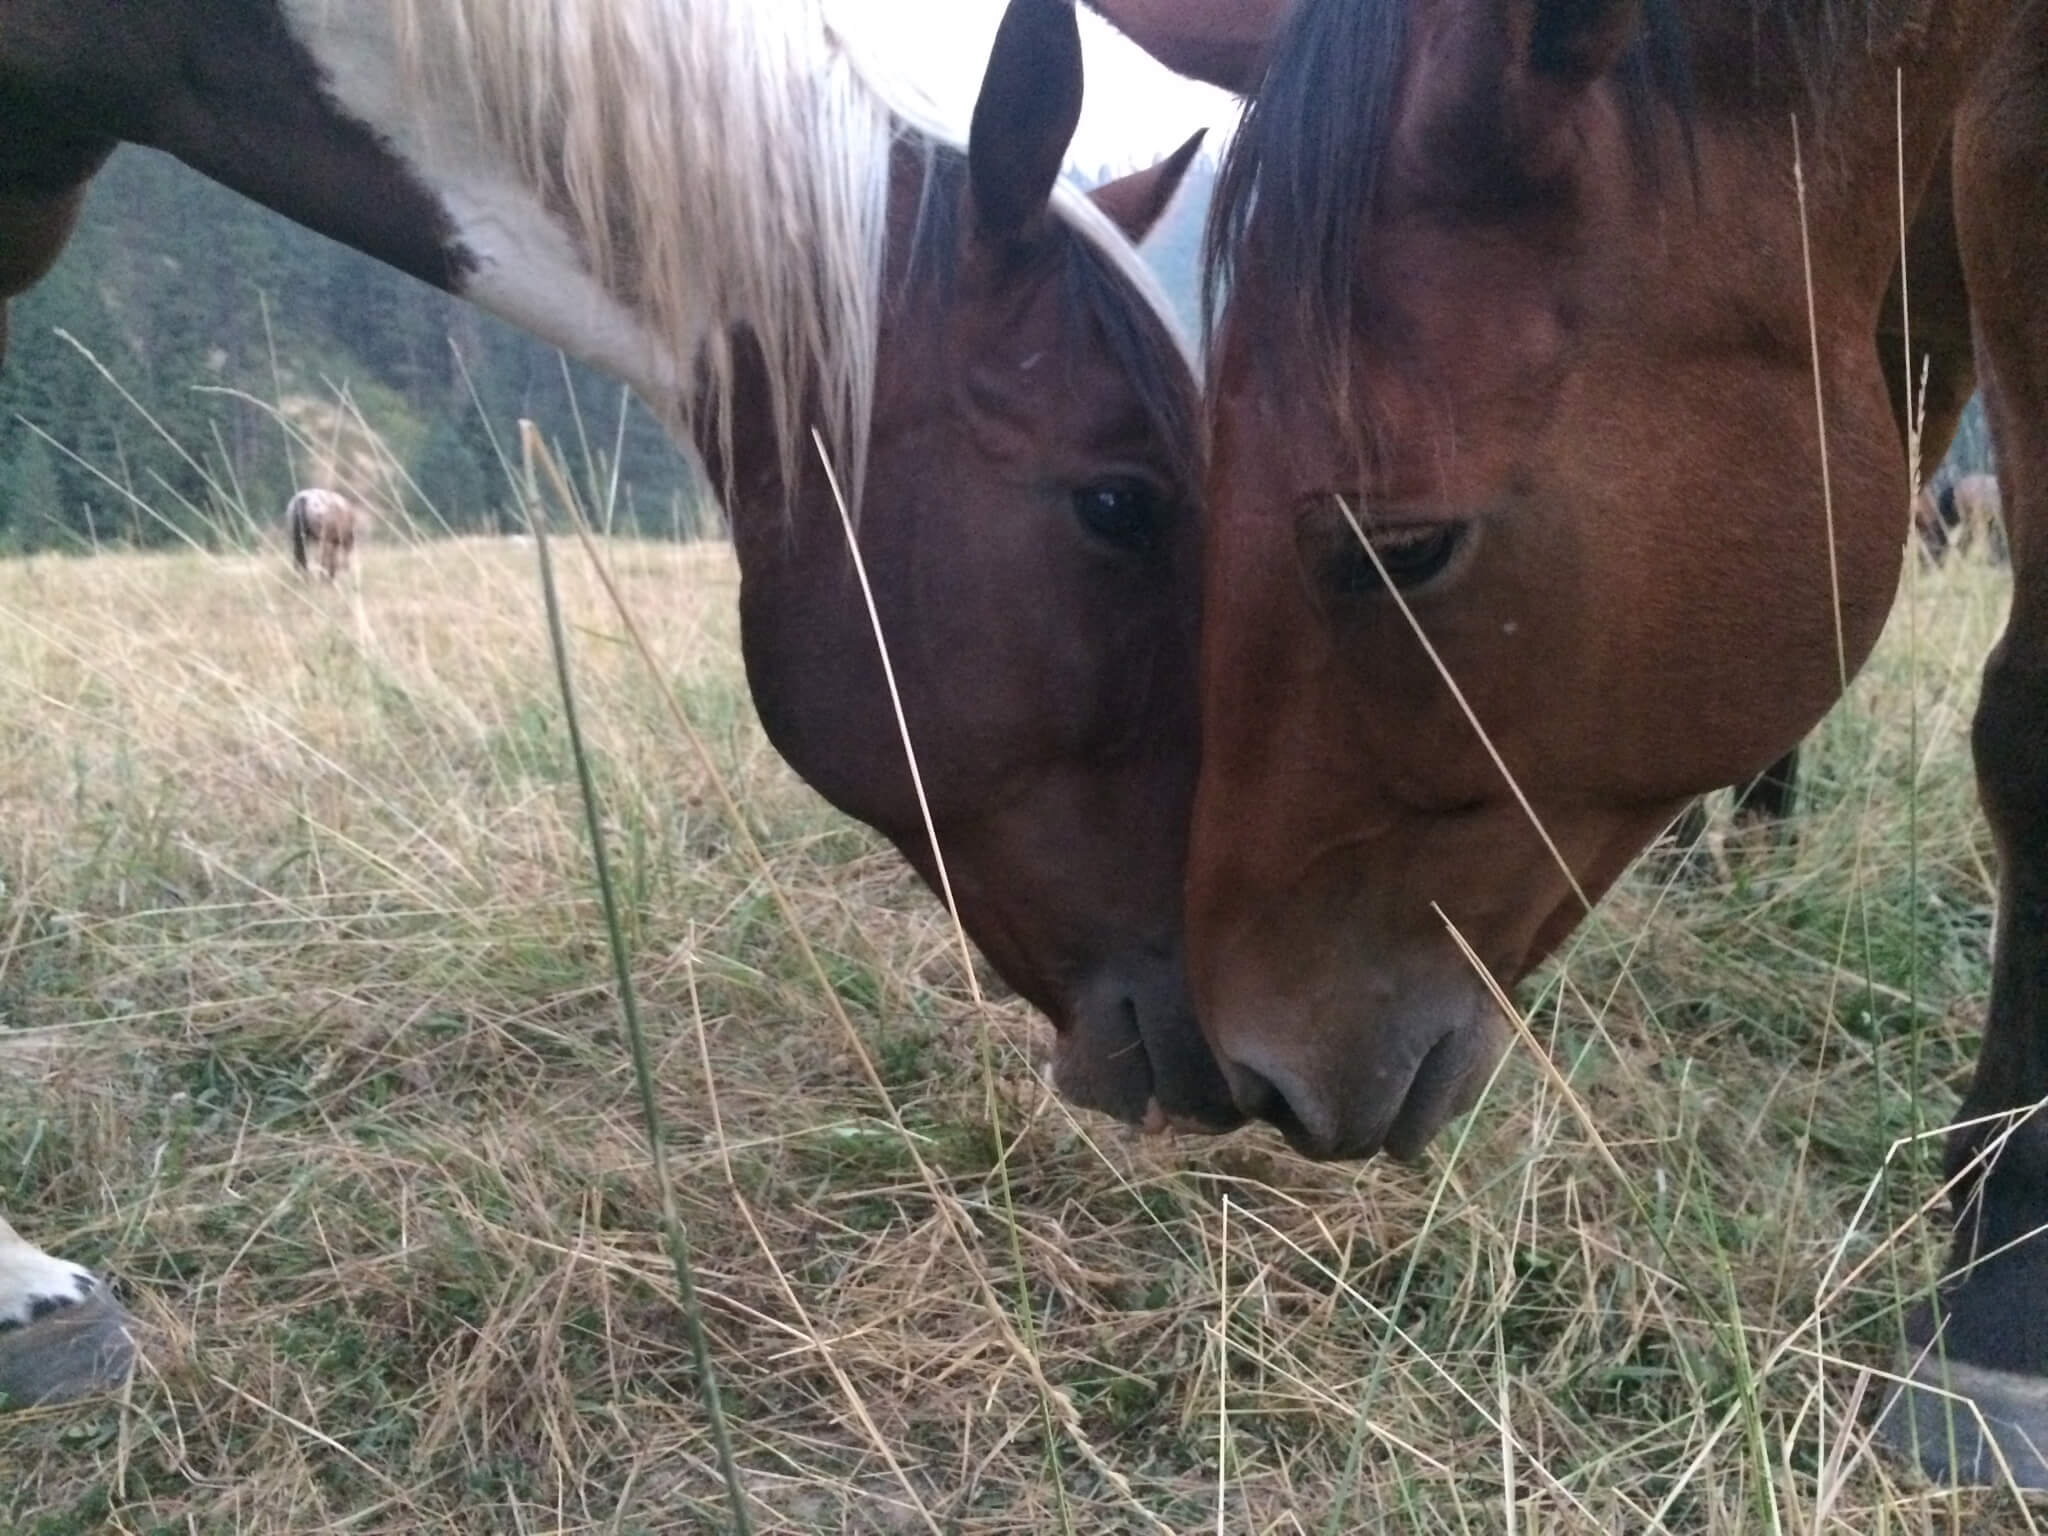 Two horses show each other affection by nuzzling their noses.